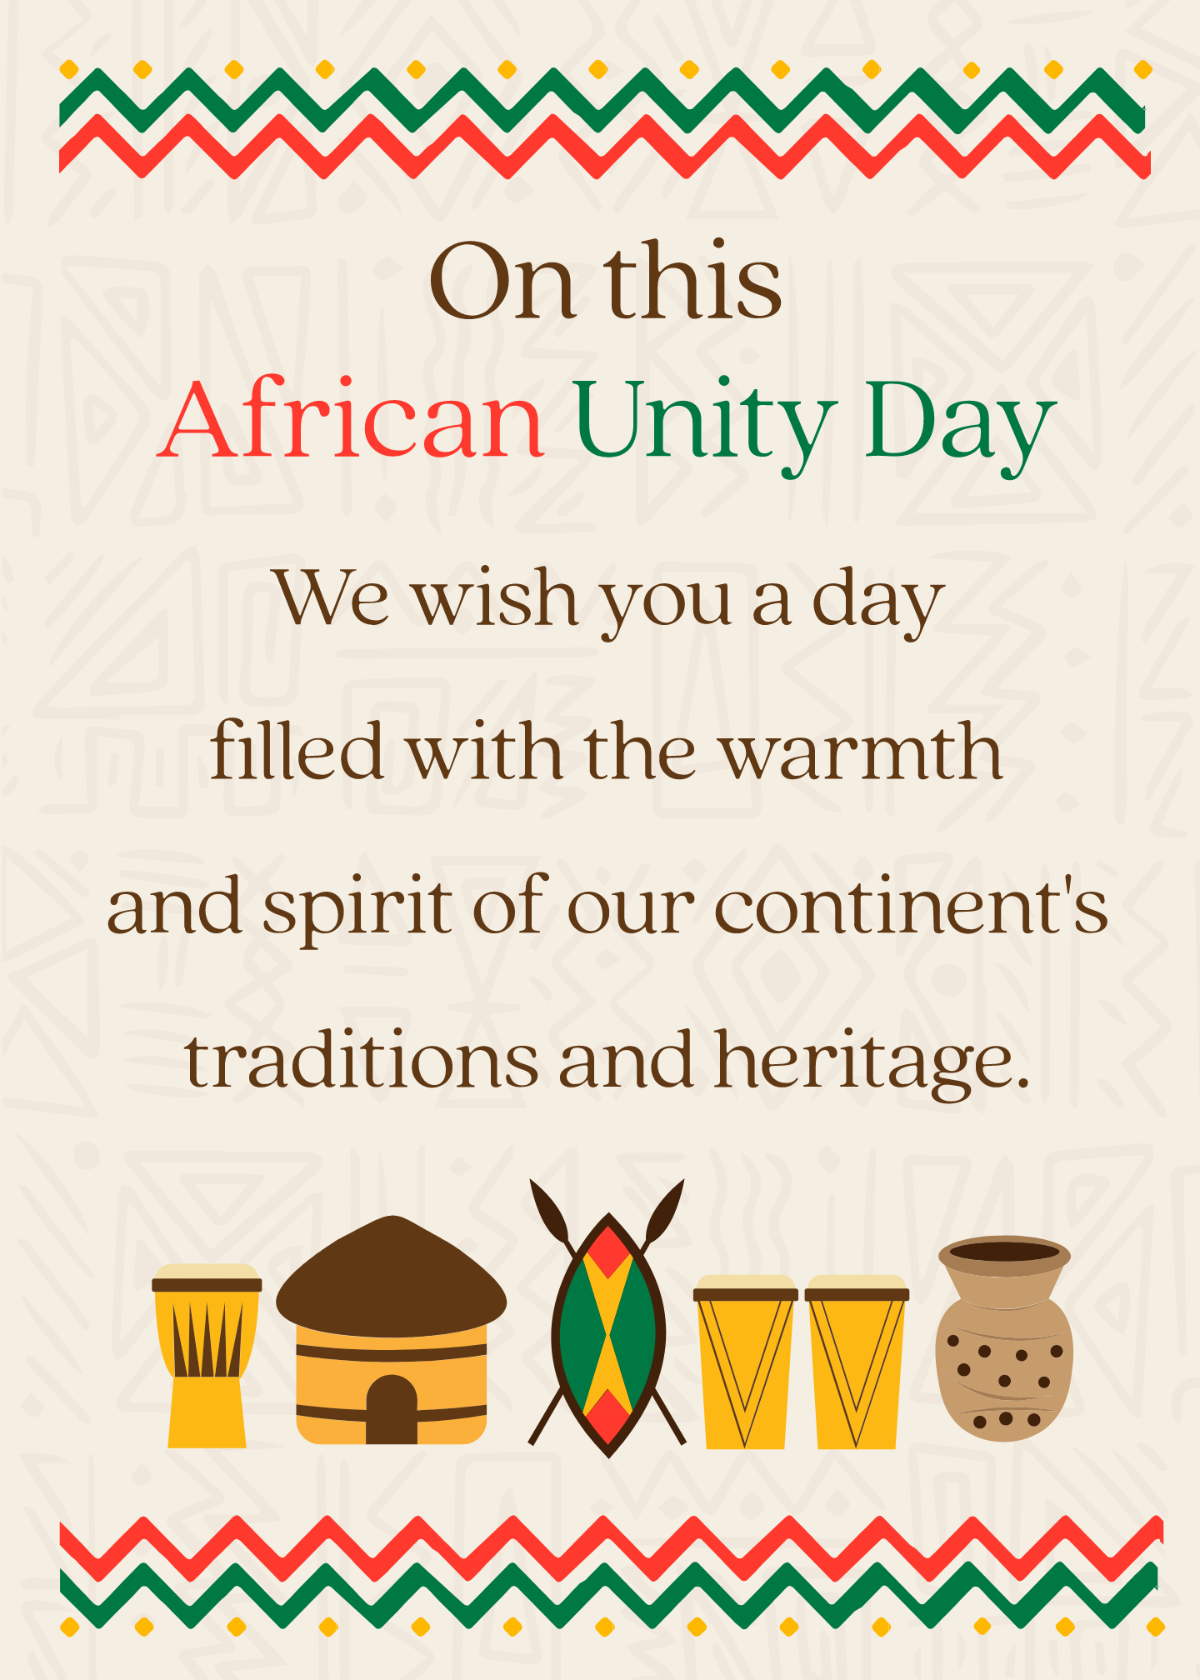 African Unity Day Wishes Template